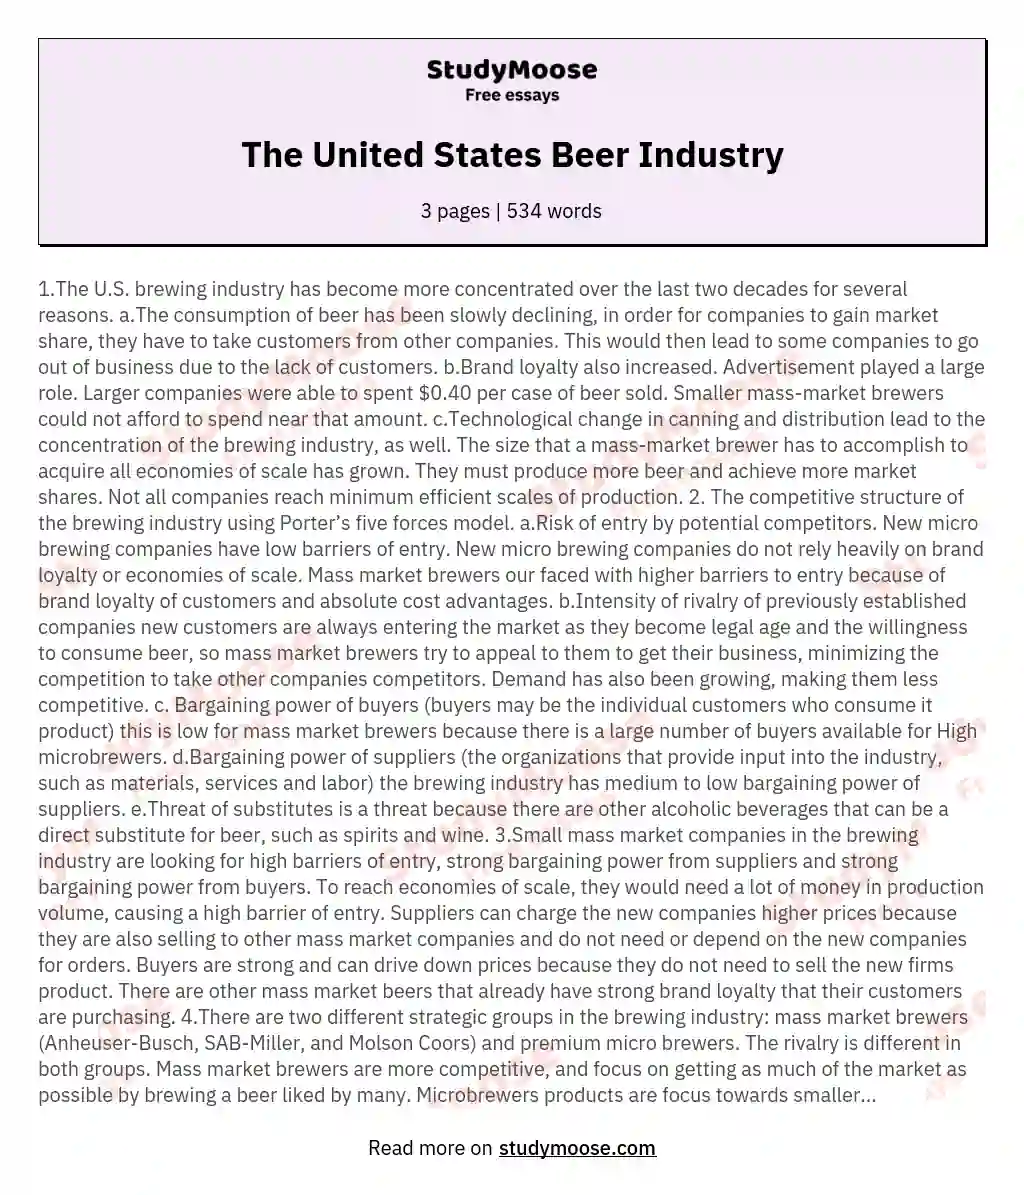 The United States Beer Industry essay